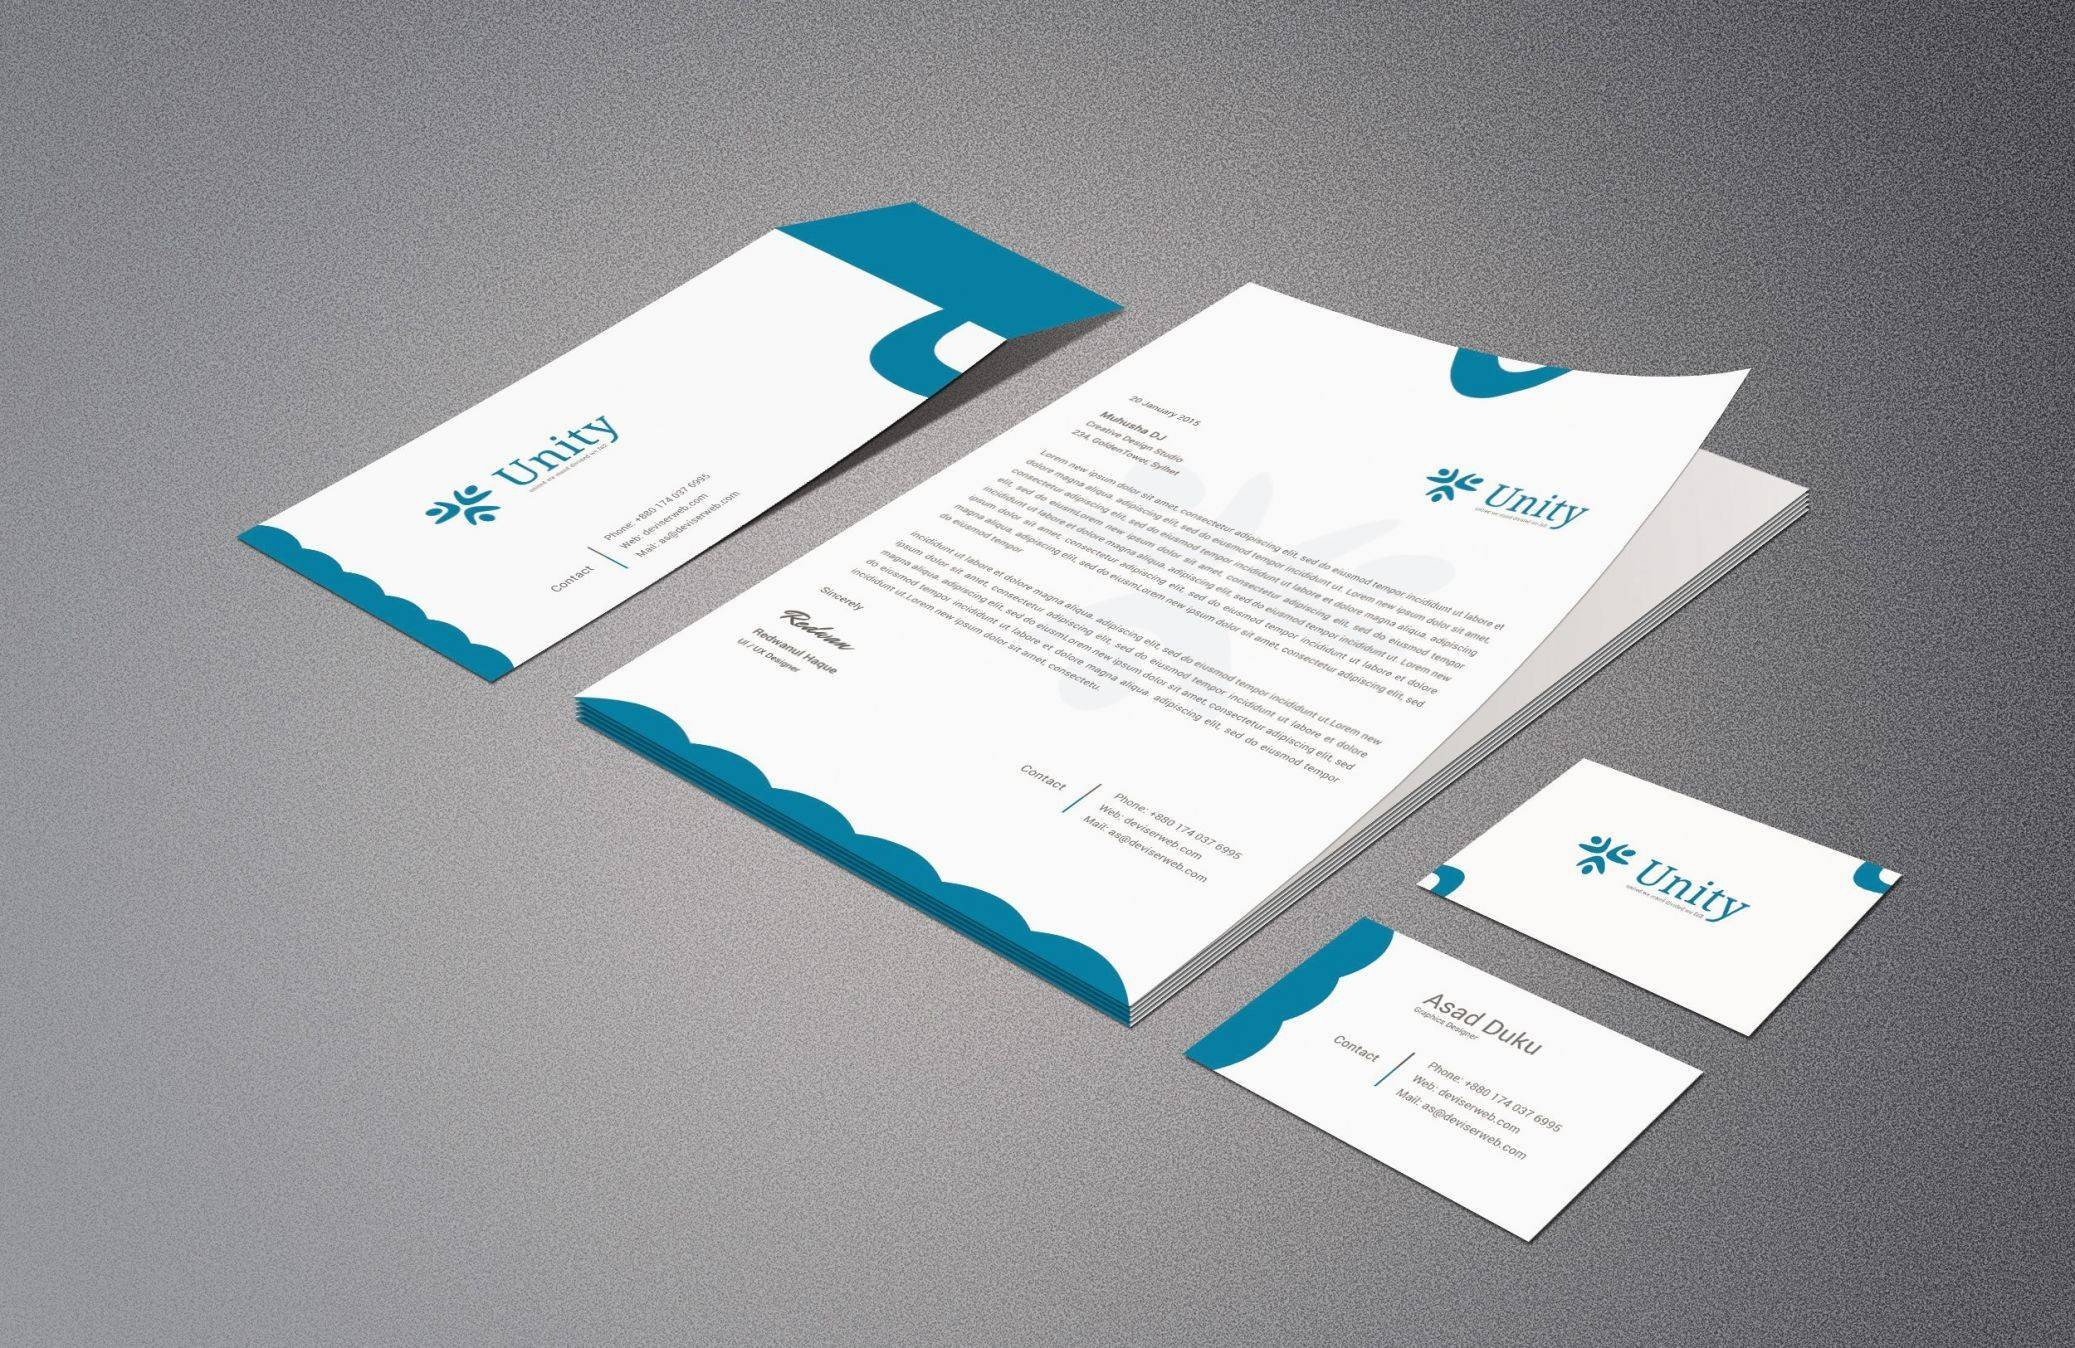 013 Business Card Template Free Download Ideas Psd Unique Of Free Business Card Templates In Psd format